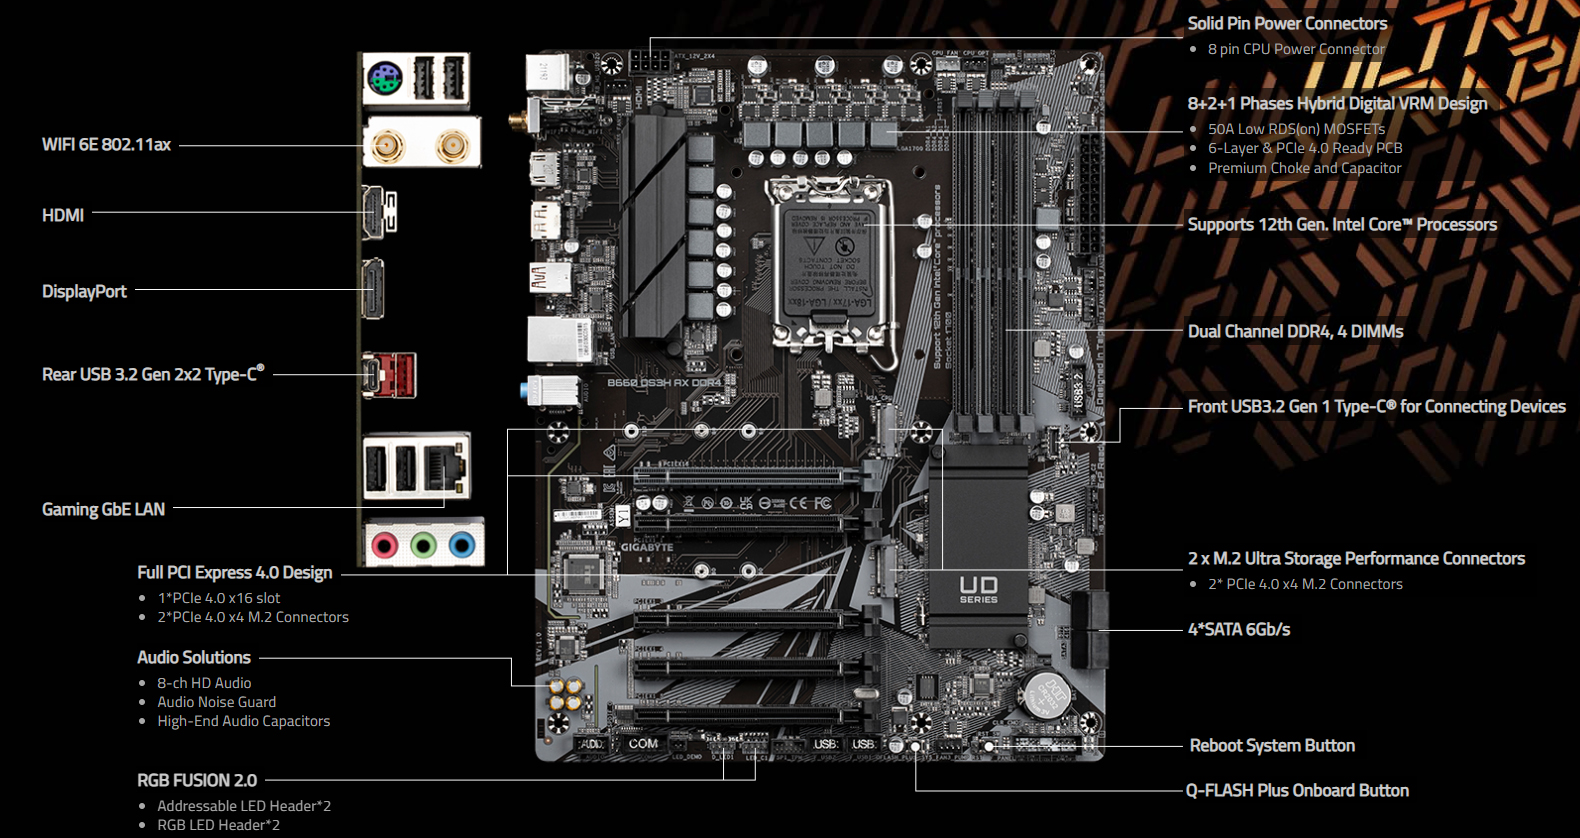 GIGABYTE B660 DS3H AX DDR4 8+2+1 Phases Hybrid Digital VRM with MOS Heatsink​ ATX form factor 12th gen intel core CPU support Support for DDR4 XMP Up to 5333MHz 